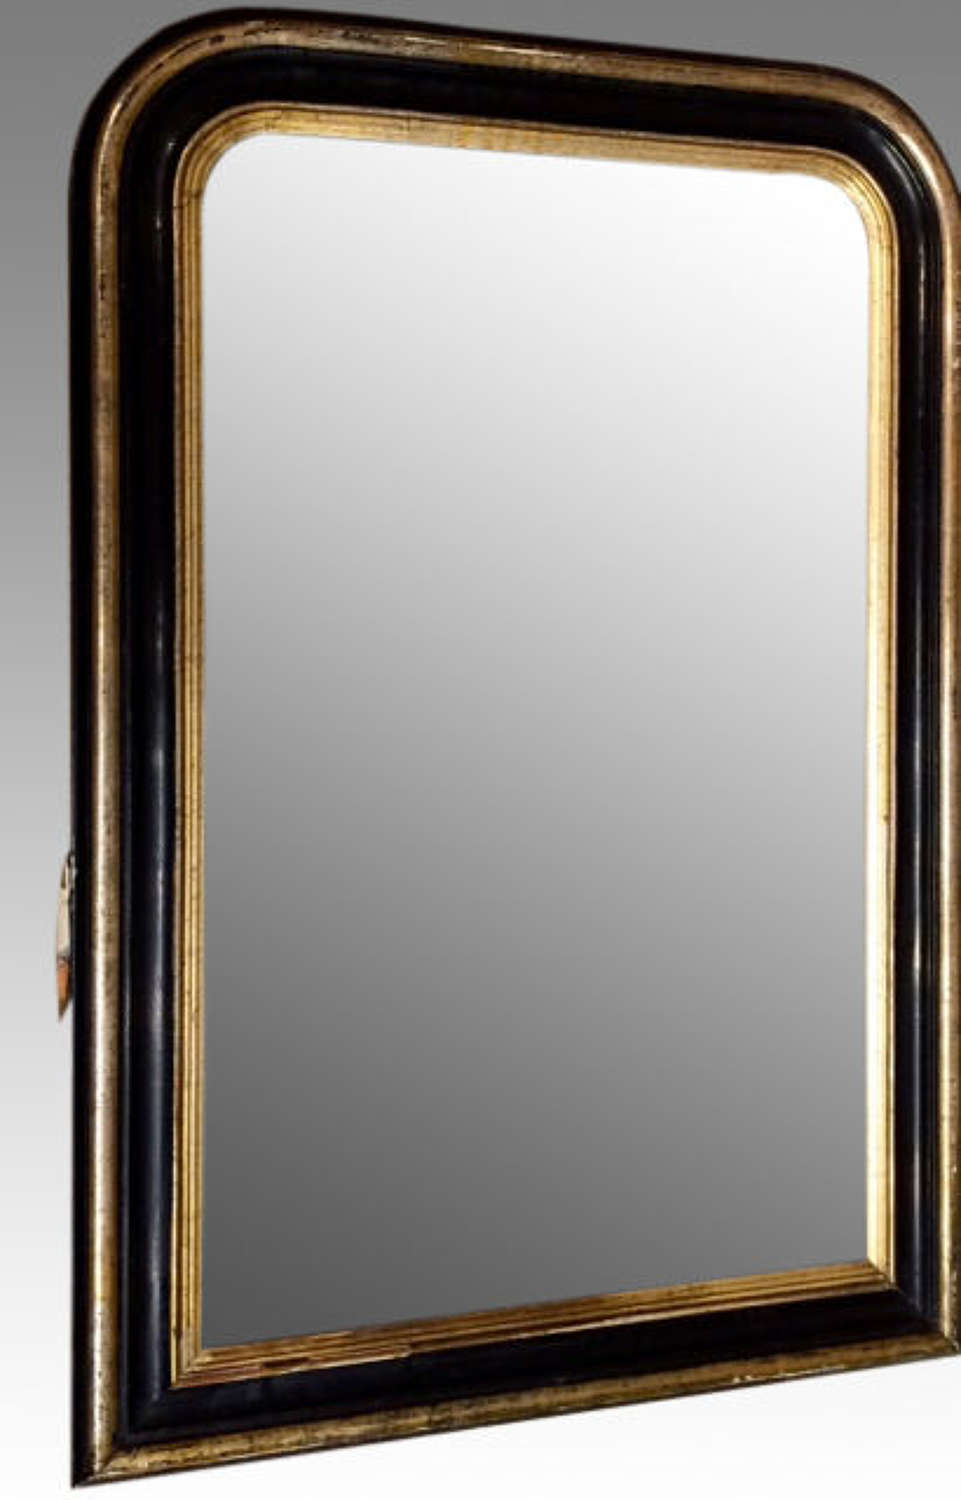 19th century French black and gilt pier mirror.